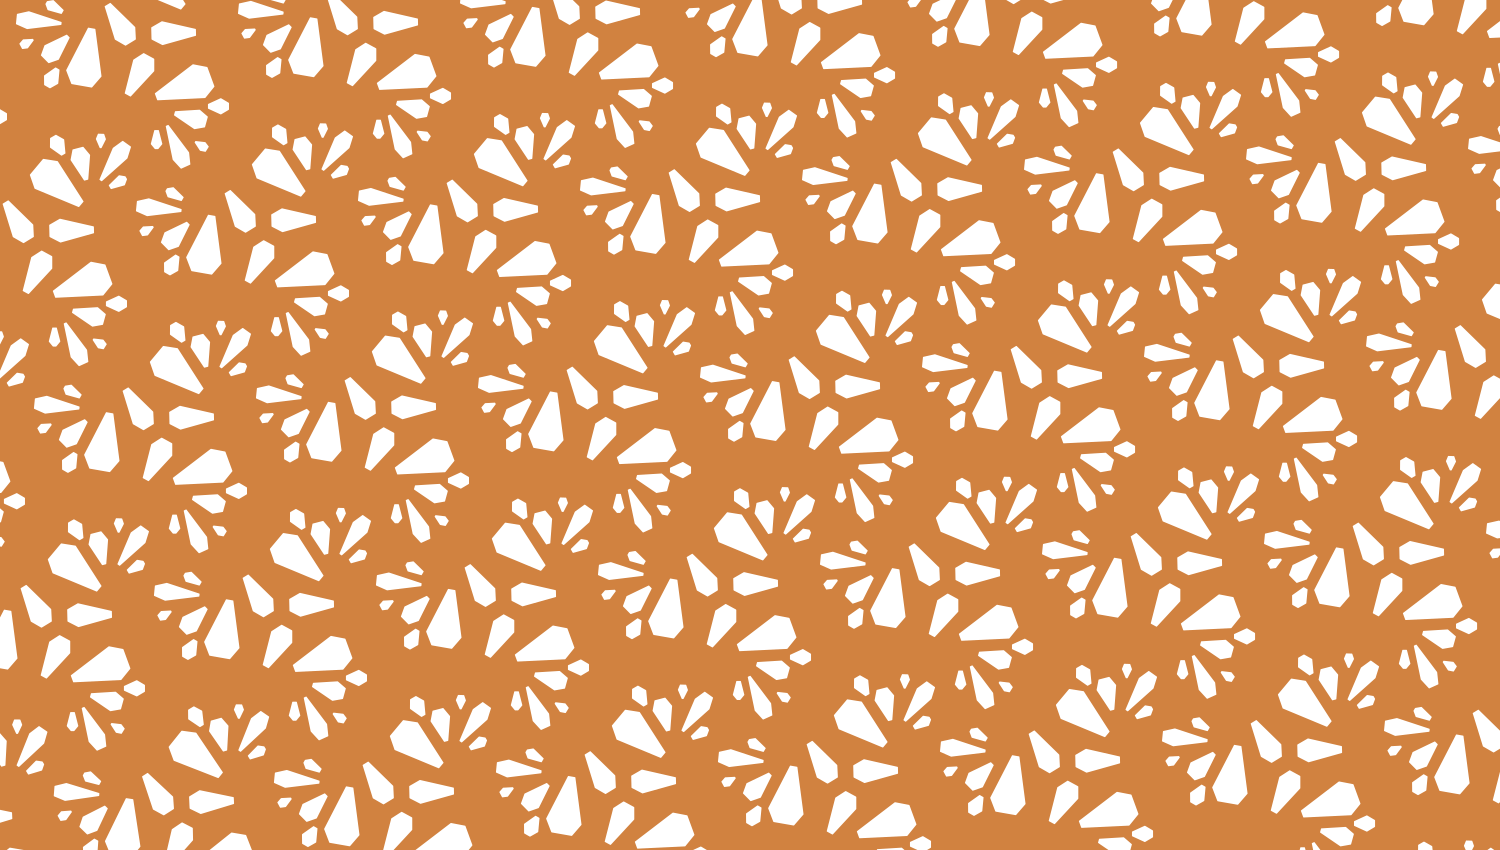 Parasoleil™ Antwerp© pattern displayed with a ochre color overlay